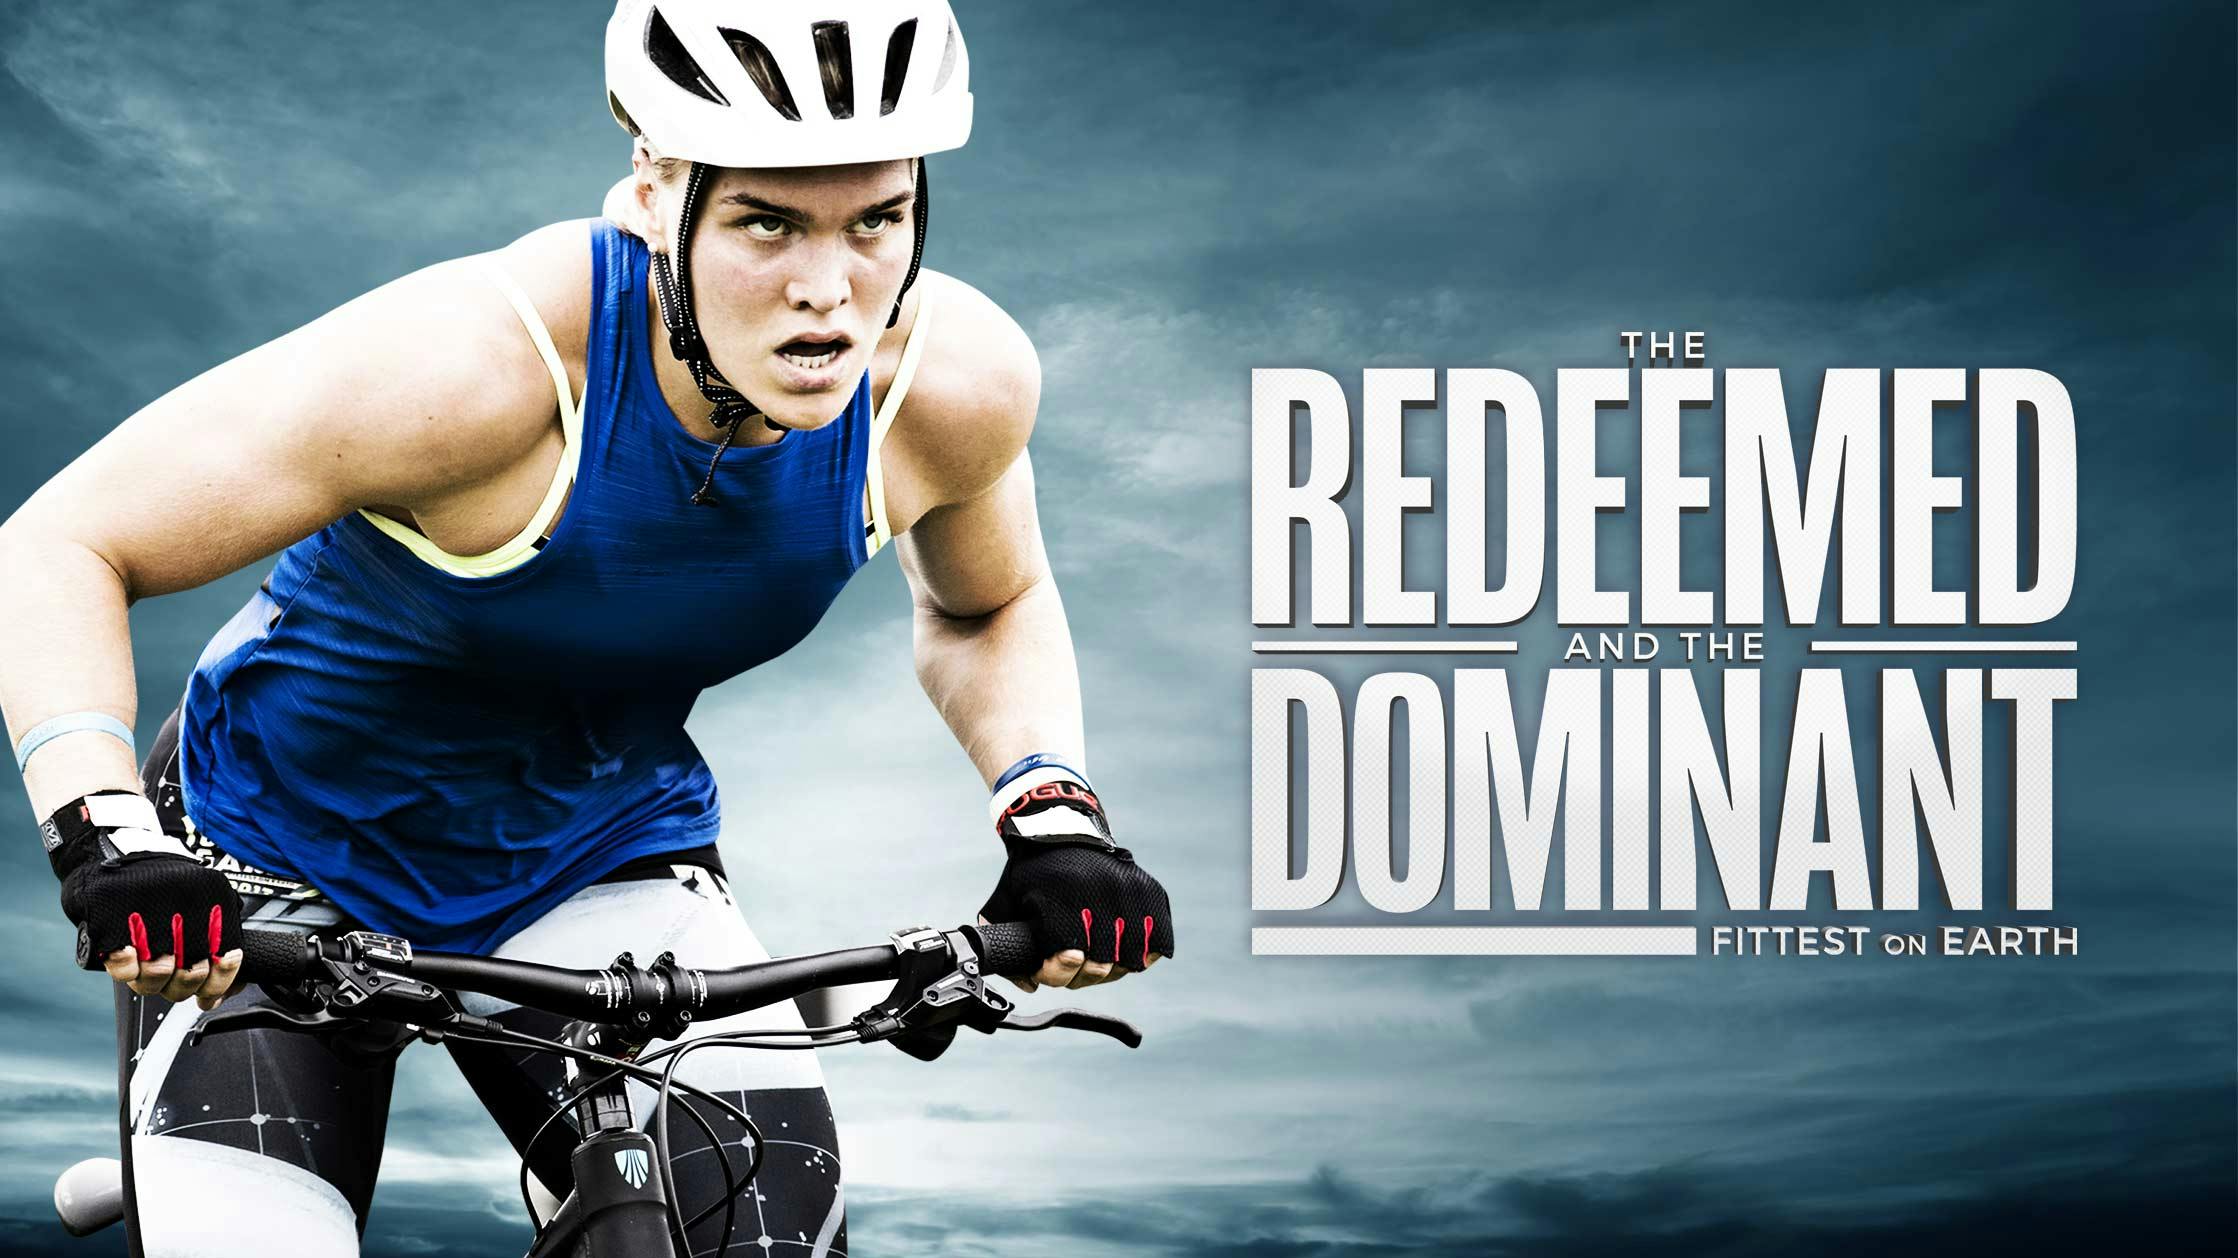 The Redeemed and the Dominant: The Fittest on Earth